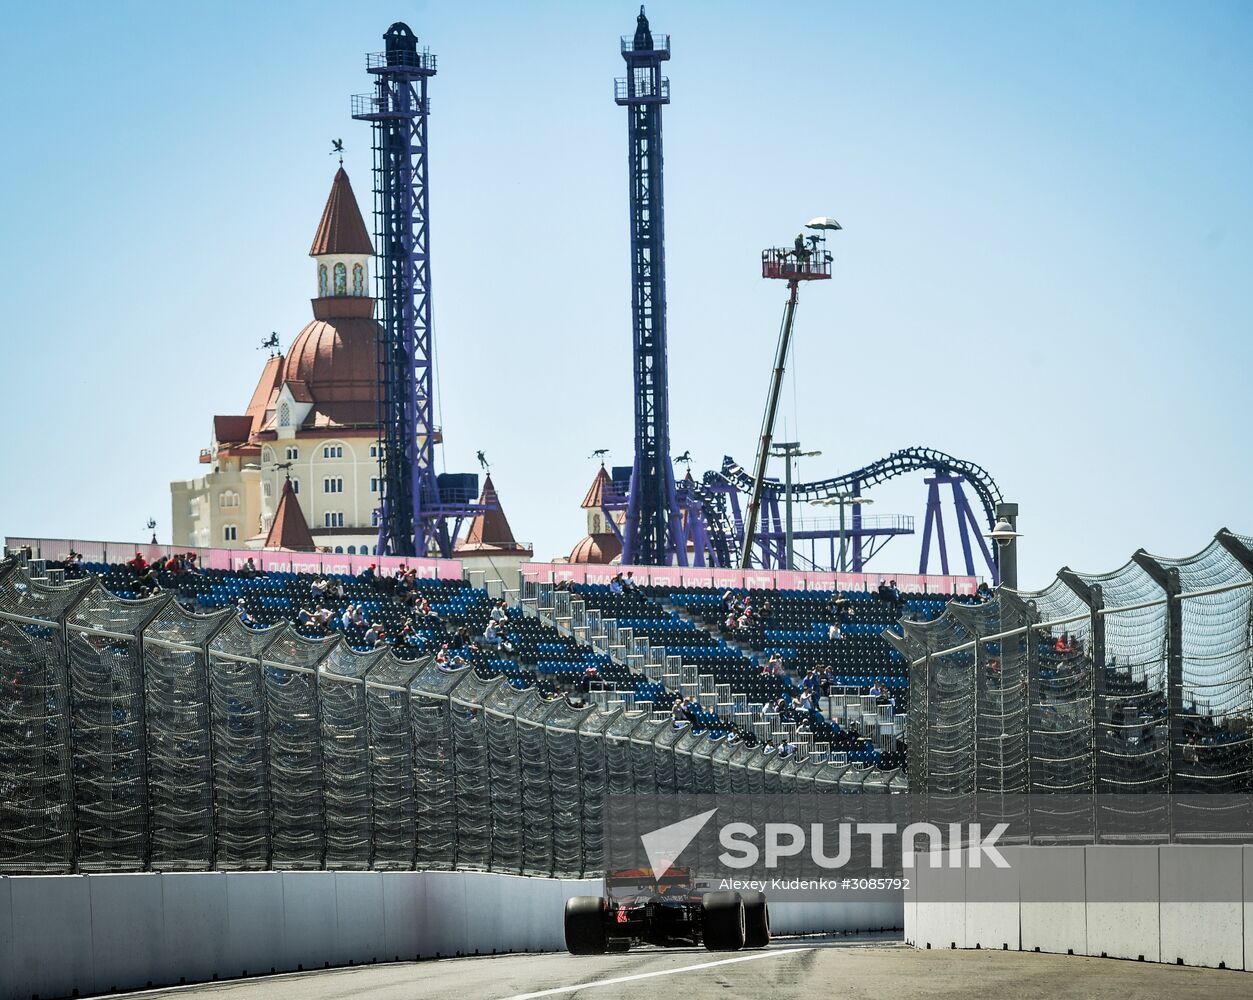 Car racing. Formula 1 Grand Prix of Russia. Free races. First session